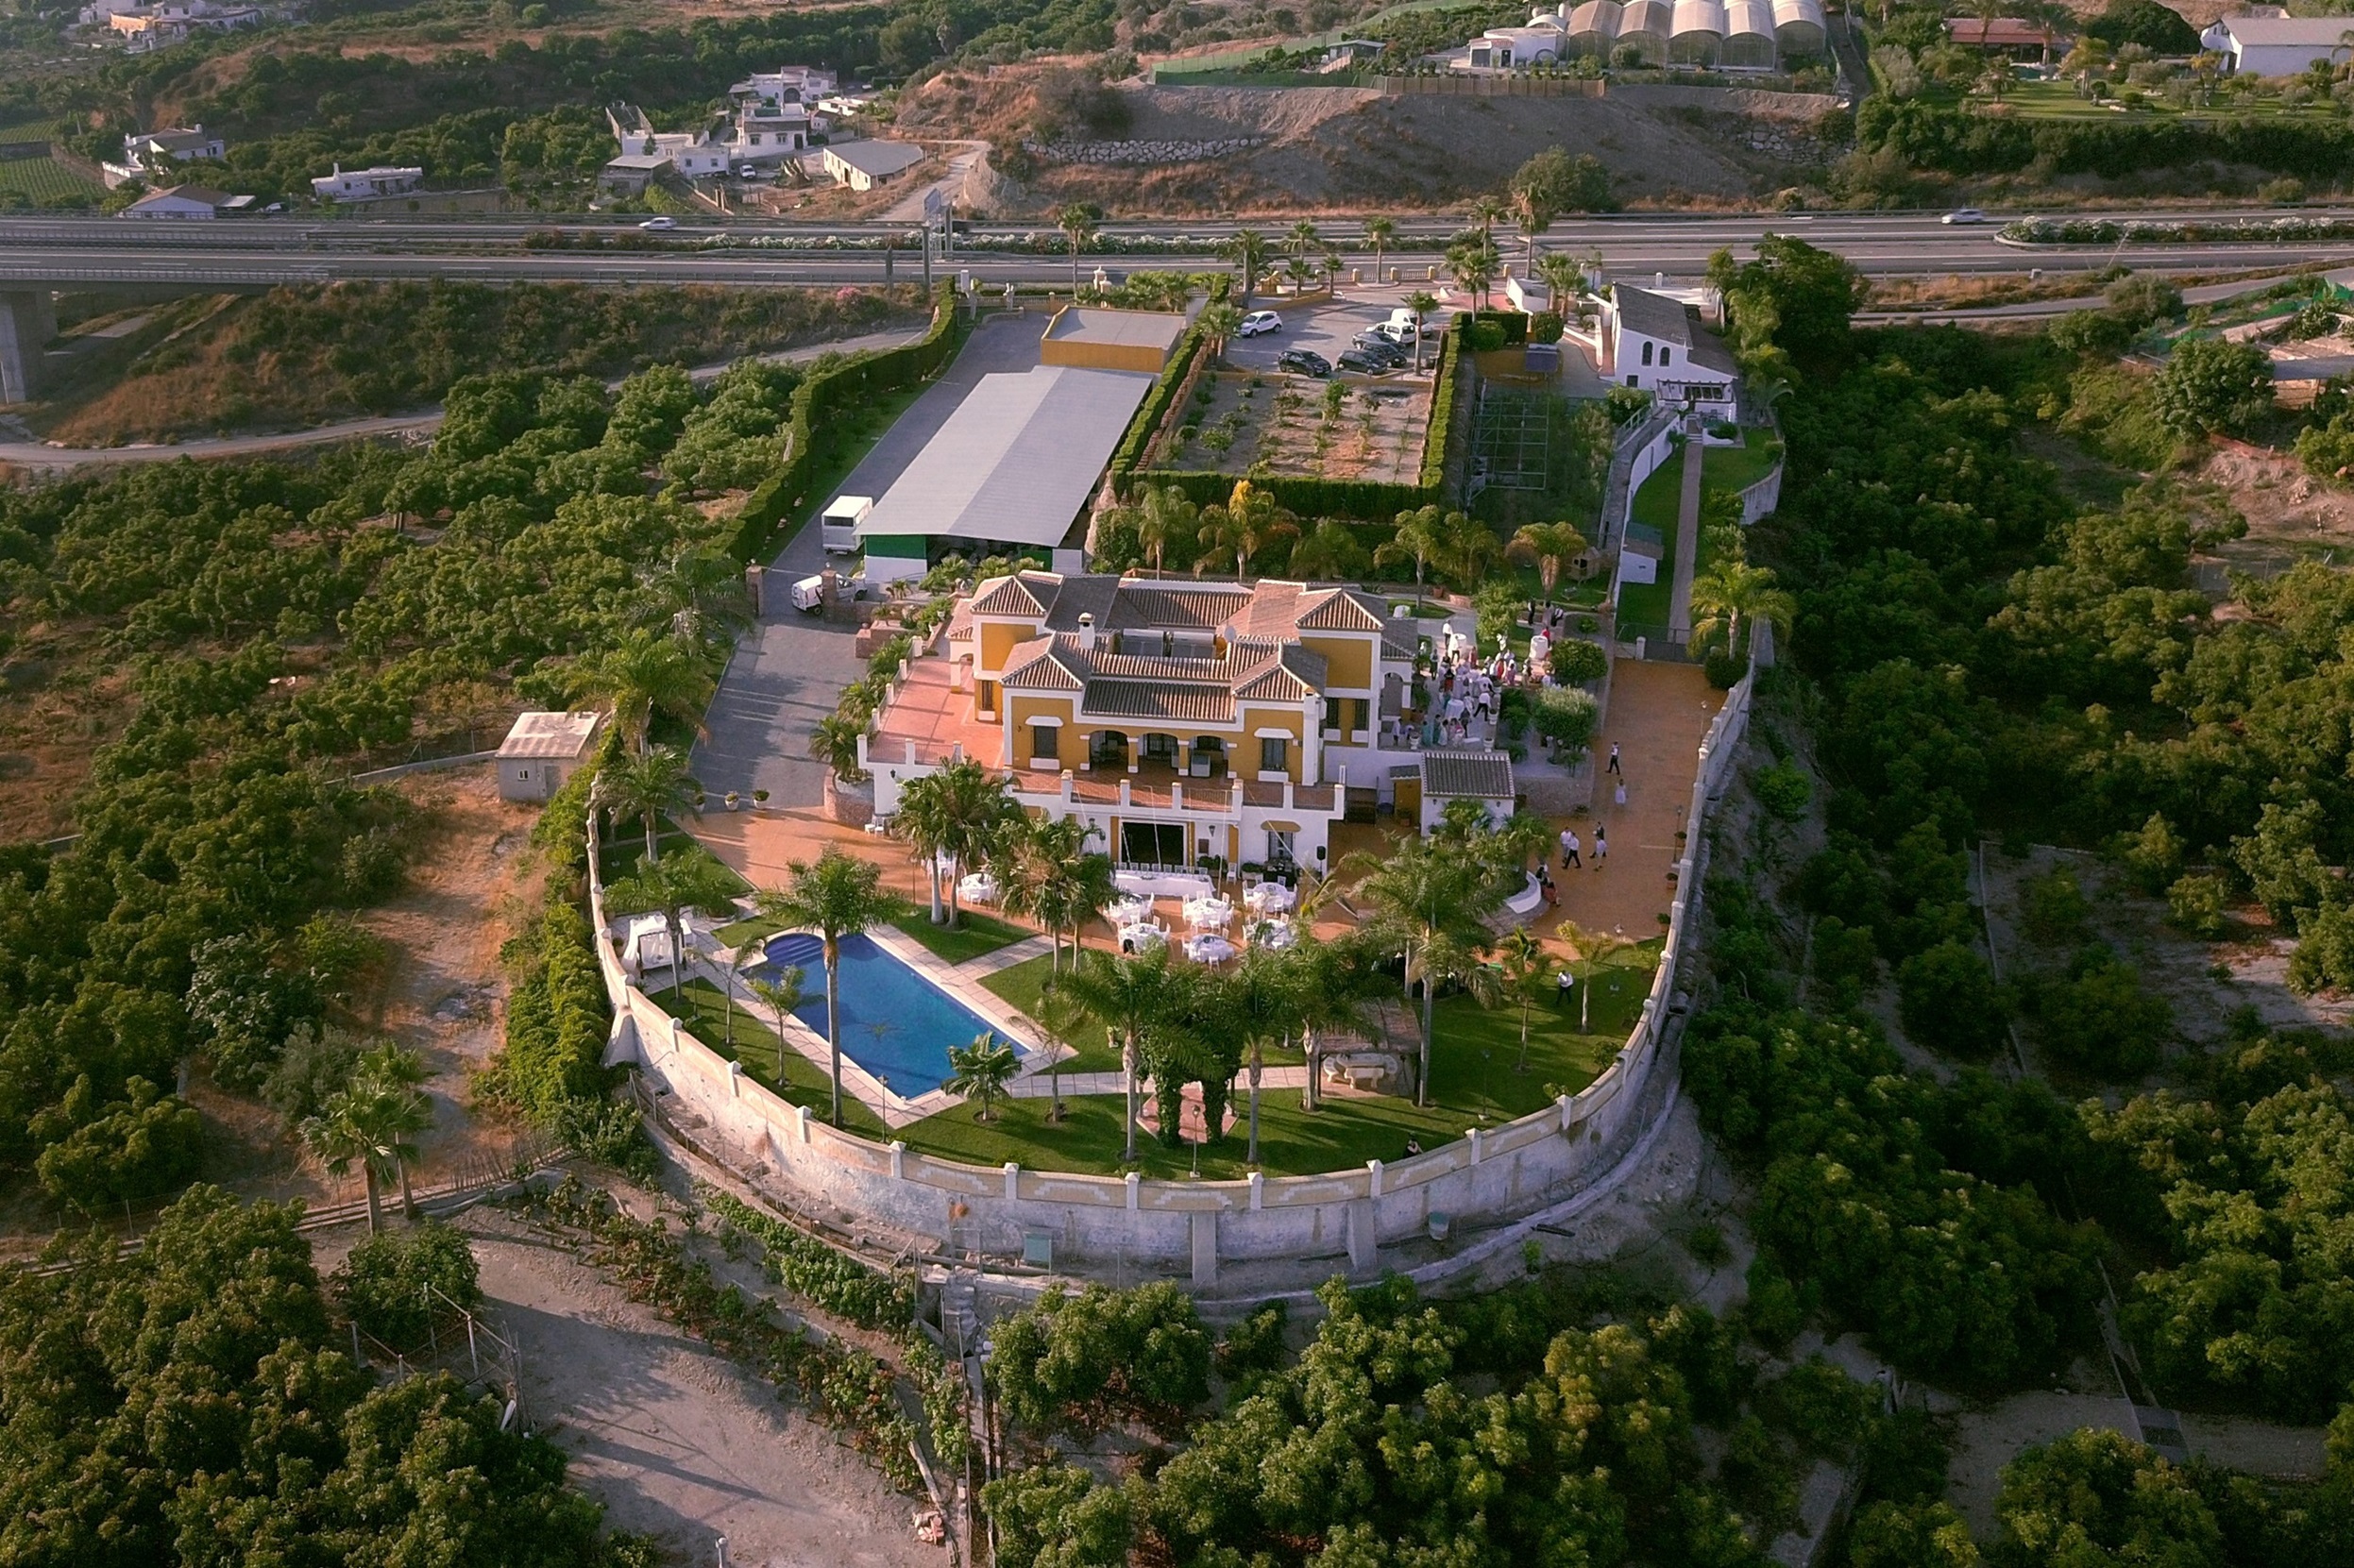 Aerial view of the private and exclusive Cortijo Maria Luisa in Nerja, Spain. Captured by Drone Pilot Dougie Farrelly, renowned Irish Professional Wedding Photographer. Collaboration with Silverscreen Film & Photography COPYRIGHT PROTECTED